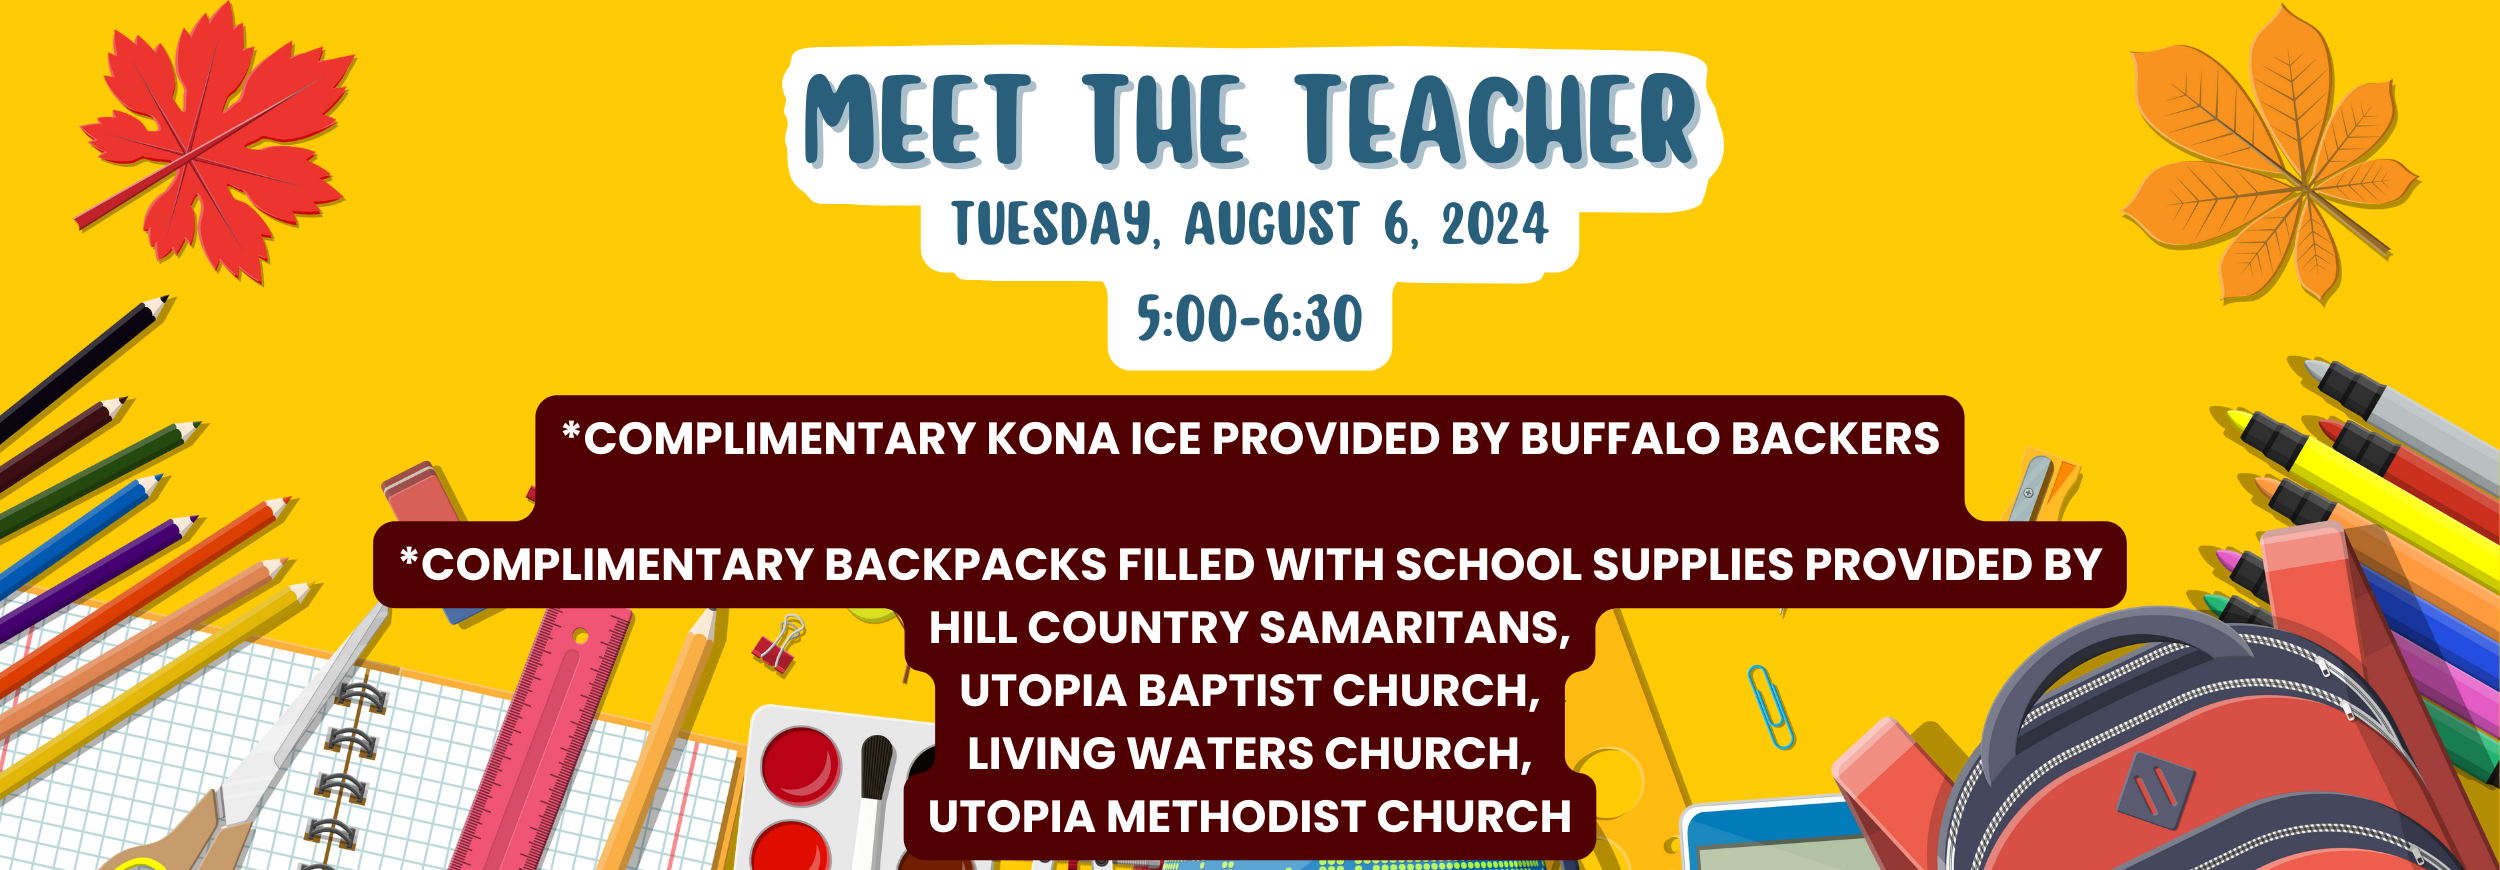 Meet the Teacher -  Tuesday, August 6 - 5:00-6:30 - *Complimentary Kona Ice provided by Buffalo Backers  *Complimentary Backpacks Provided by Hill Country Samaritans, Utopia Baptist Church, Living Waters Church, Utopia Methodist Church